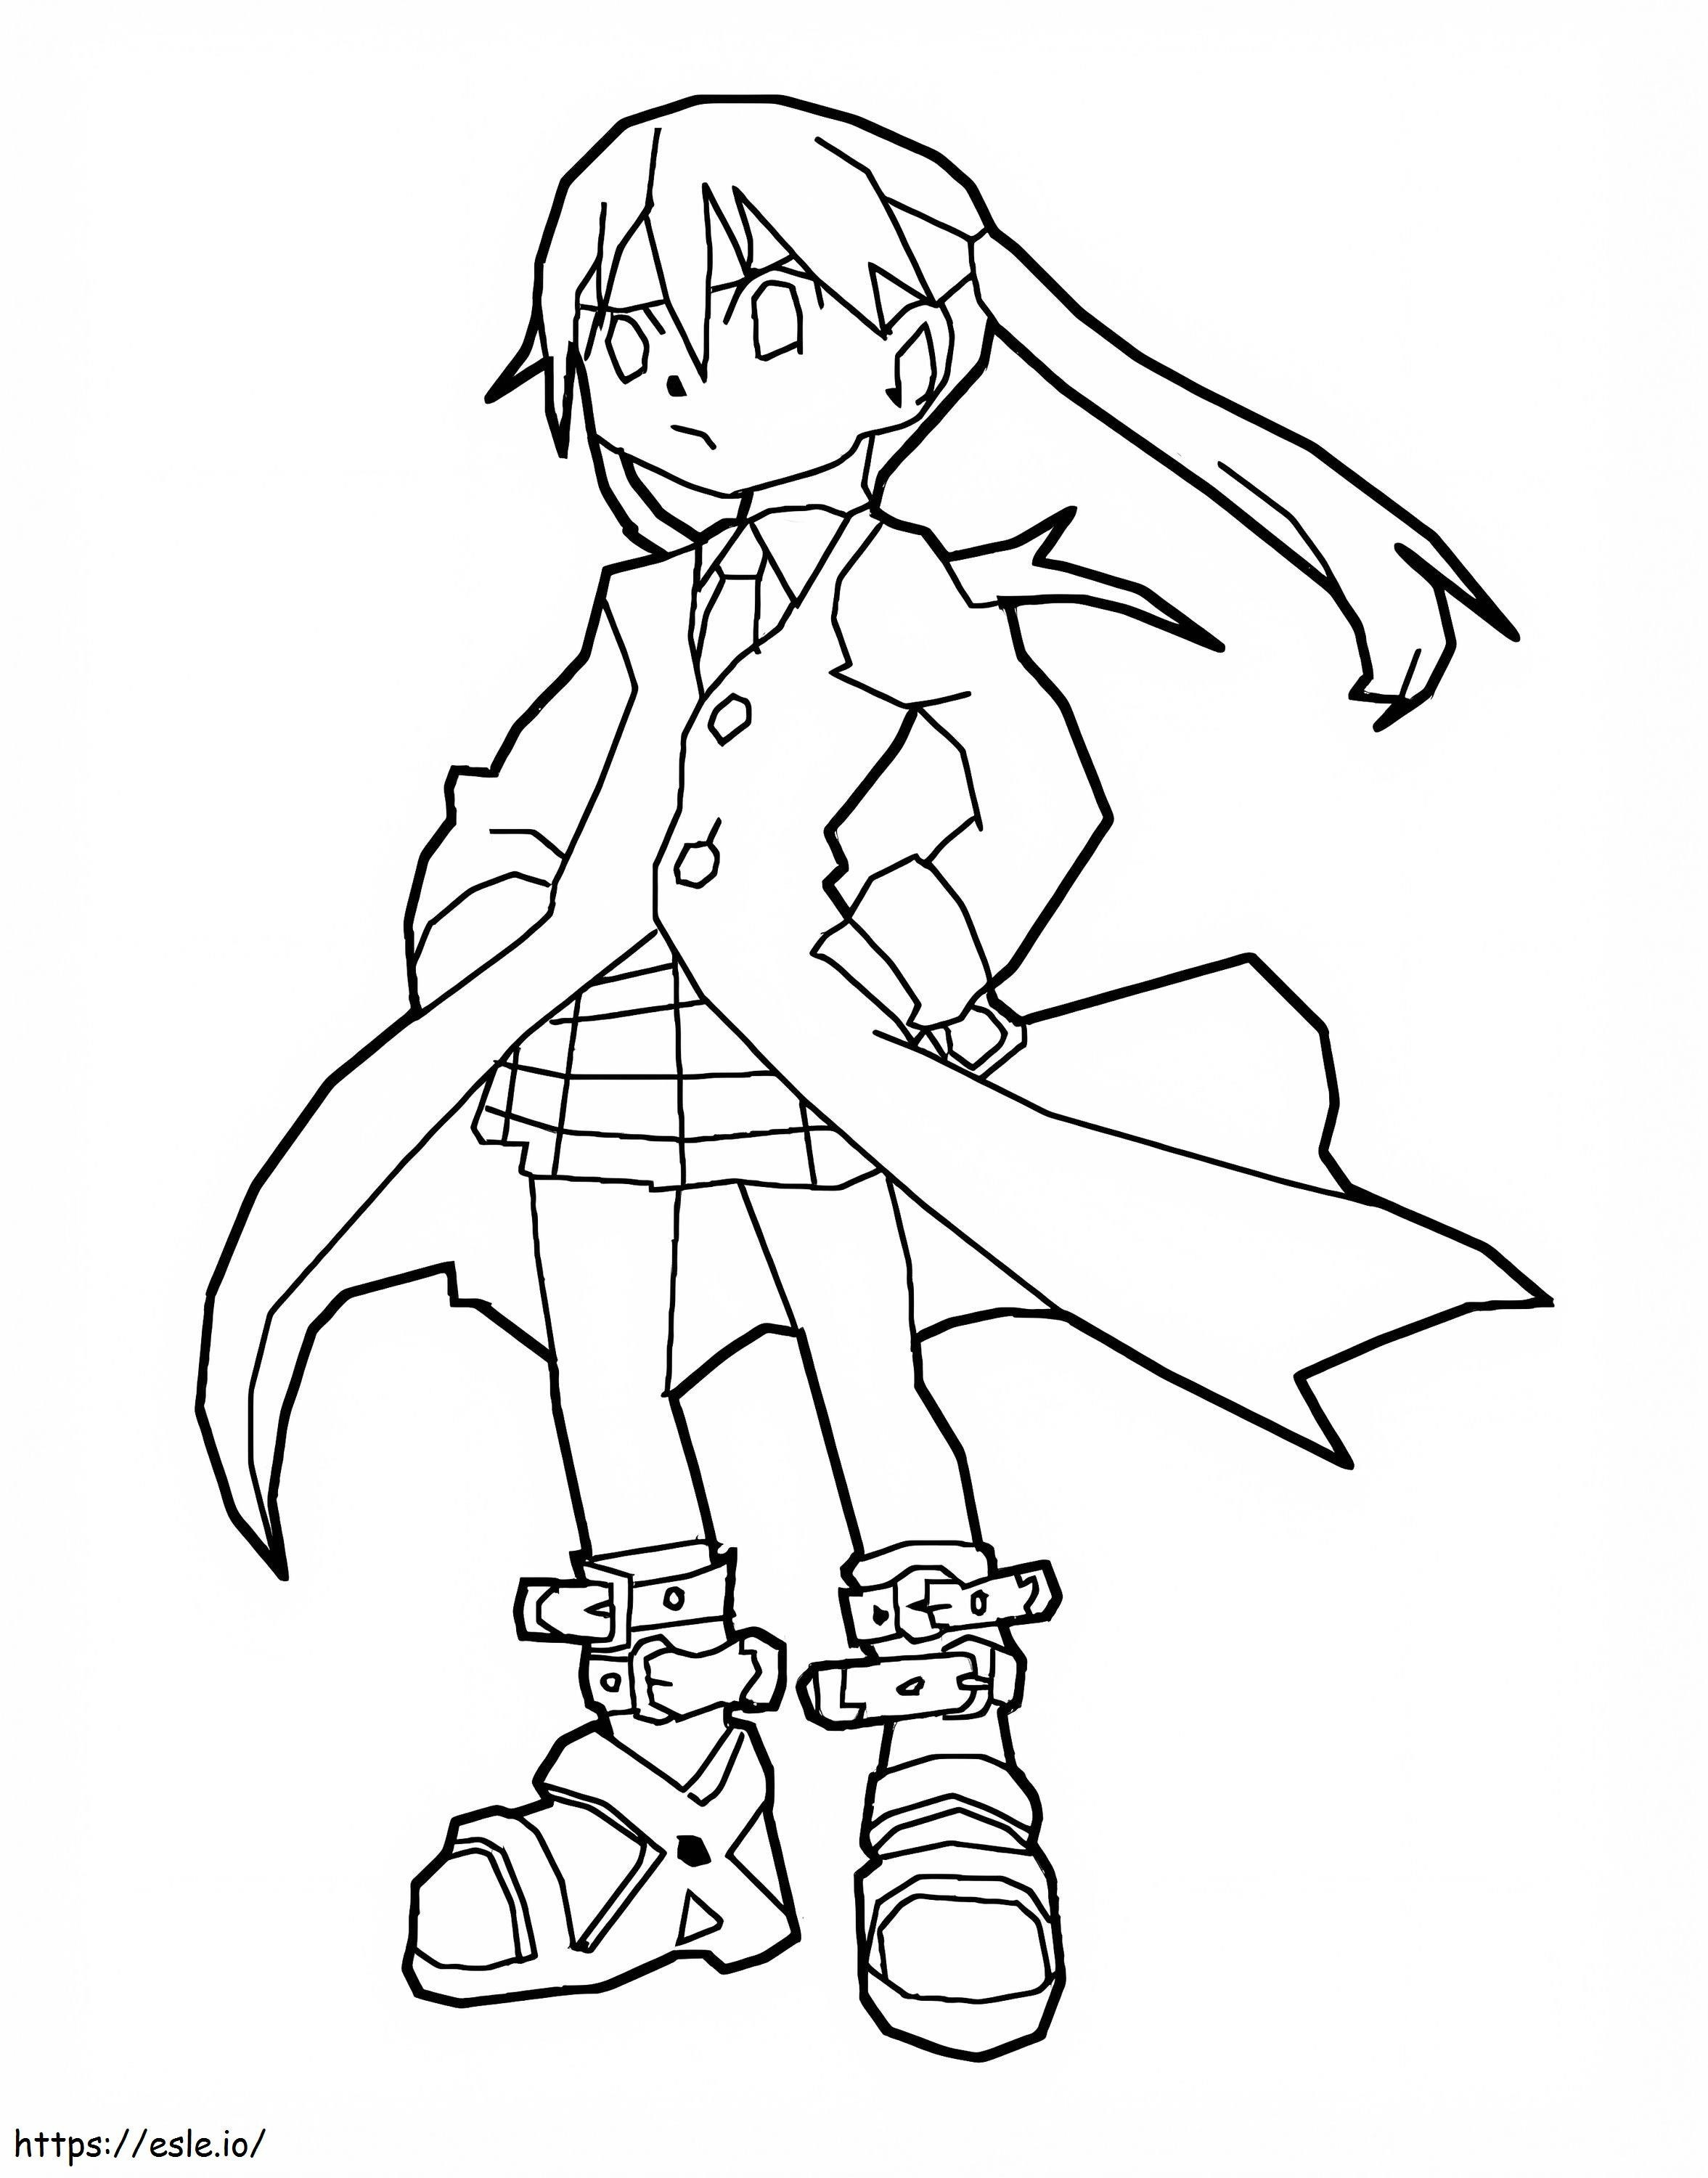 Maka Albarn The Soul Eater coloring page